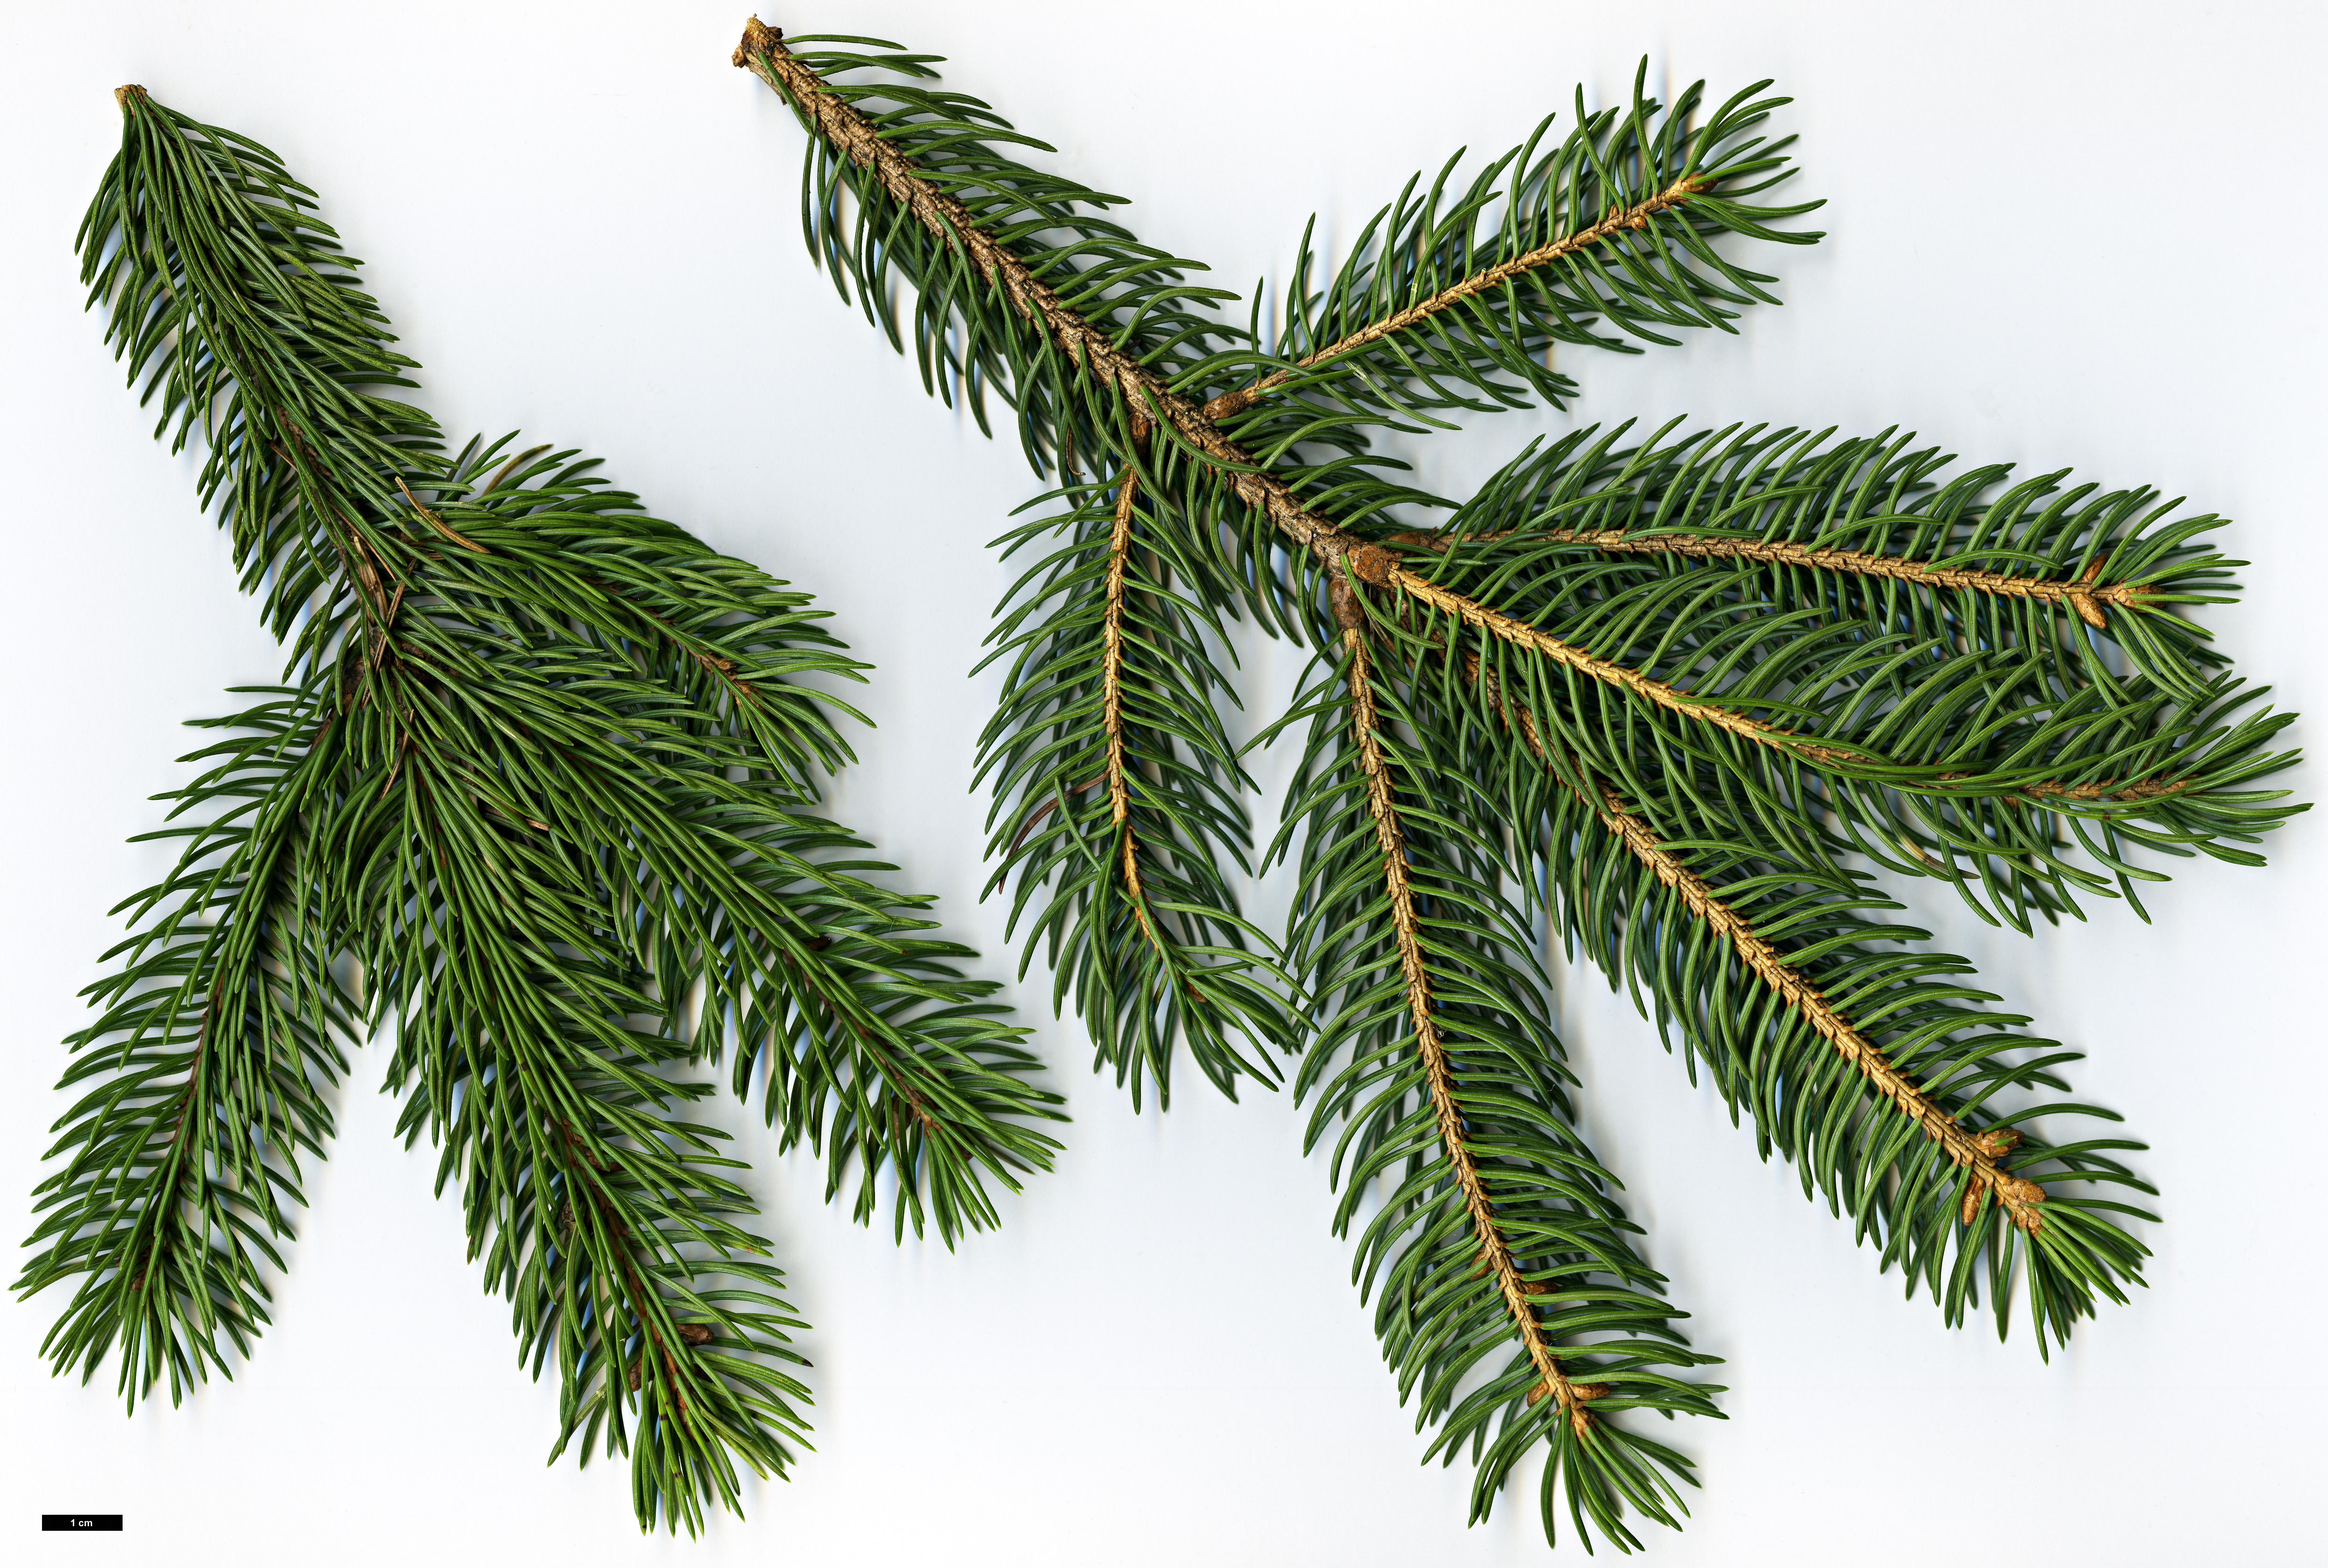 High resolution image: Family: Pinaceae - Genus: Picea - Taxon: ×lutzii (P.glauca × P.sitchensis)